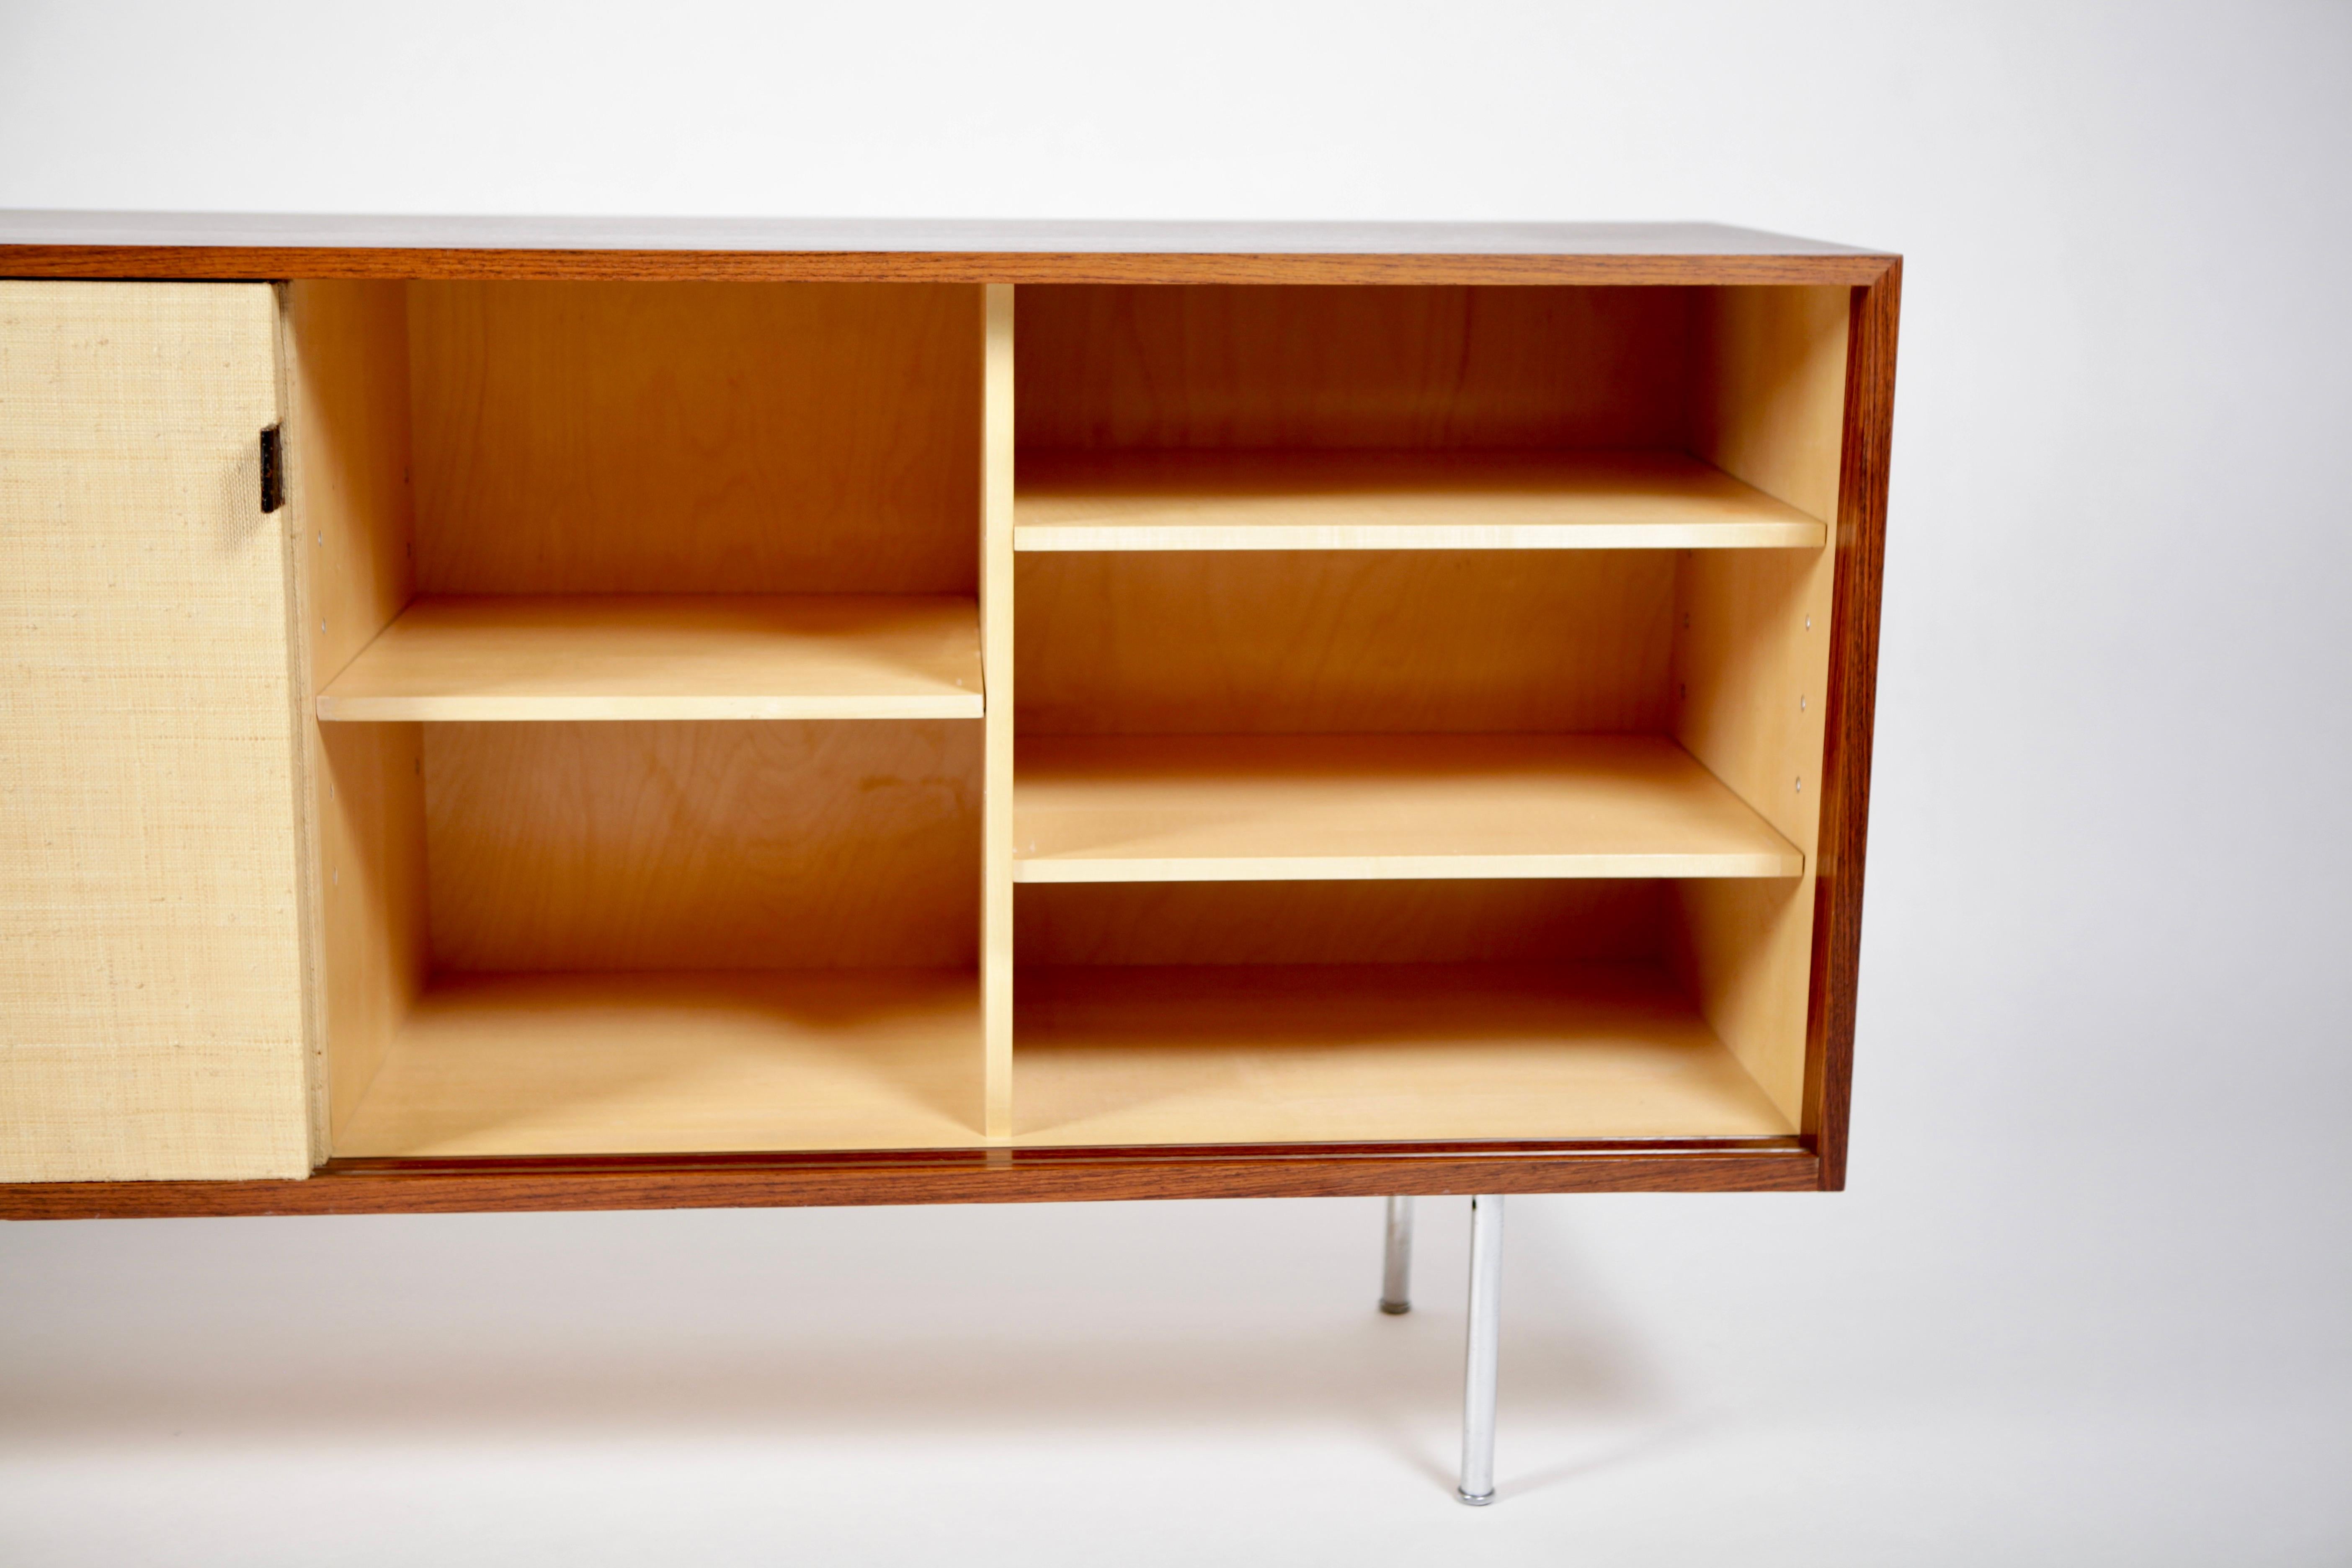 Leather Sideboard in East Indian Rosewood & Seagrass by Florence Knoll, Designed 1947 For Sale